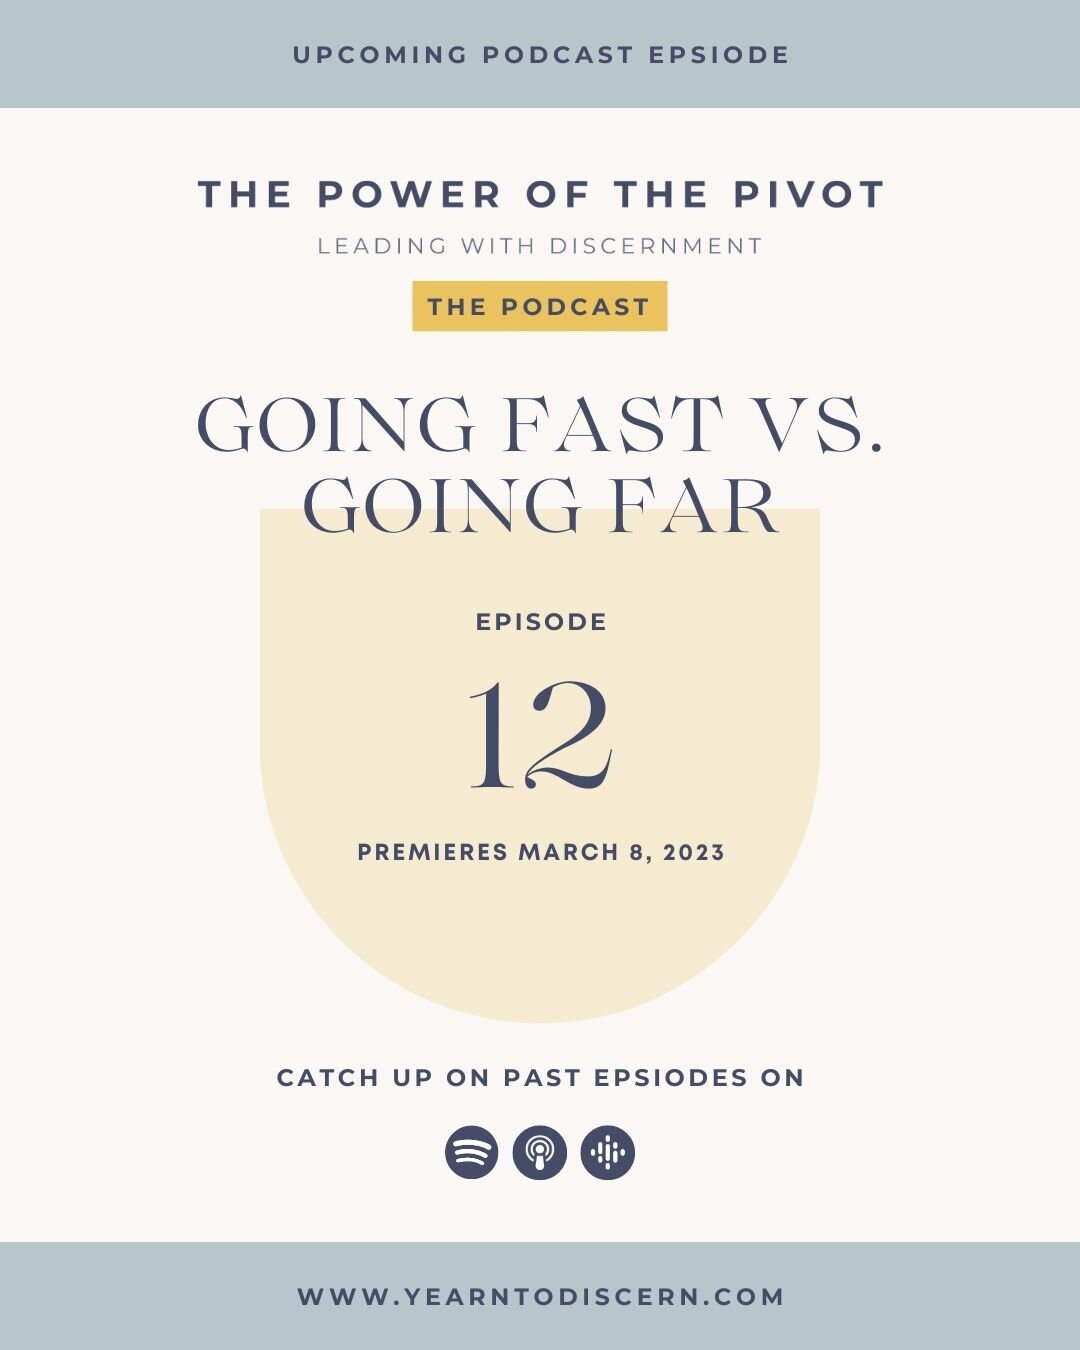 Next week's podcast episode is entitled: &quot;Going Fast vs. Going Far&rdquo; and will premiere on March 8th!!⁠
⁠
About this episode:⁠
⁠
There is an African Proverb that says &ldquo;If you want to go fast, go alone, If you want to go far, go togethe